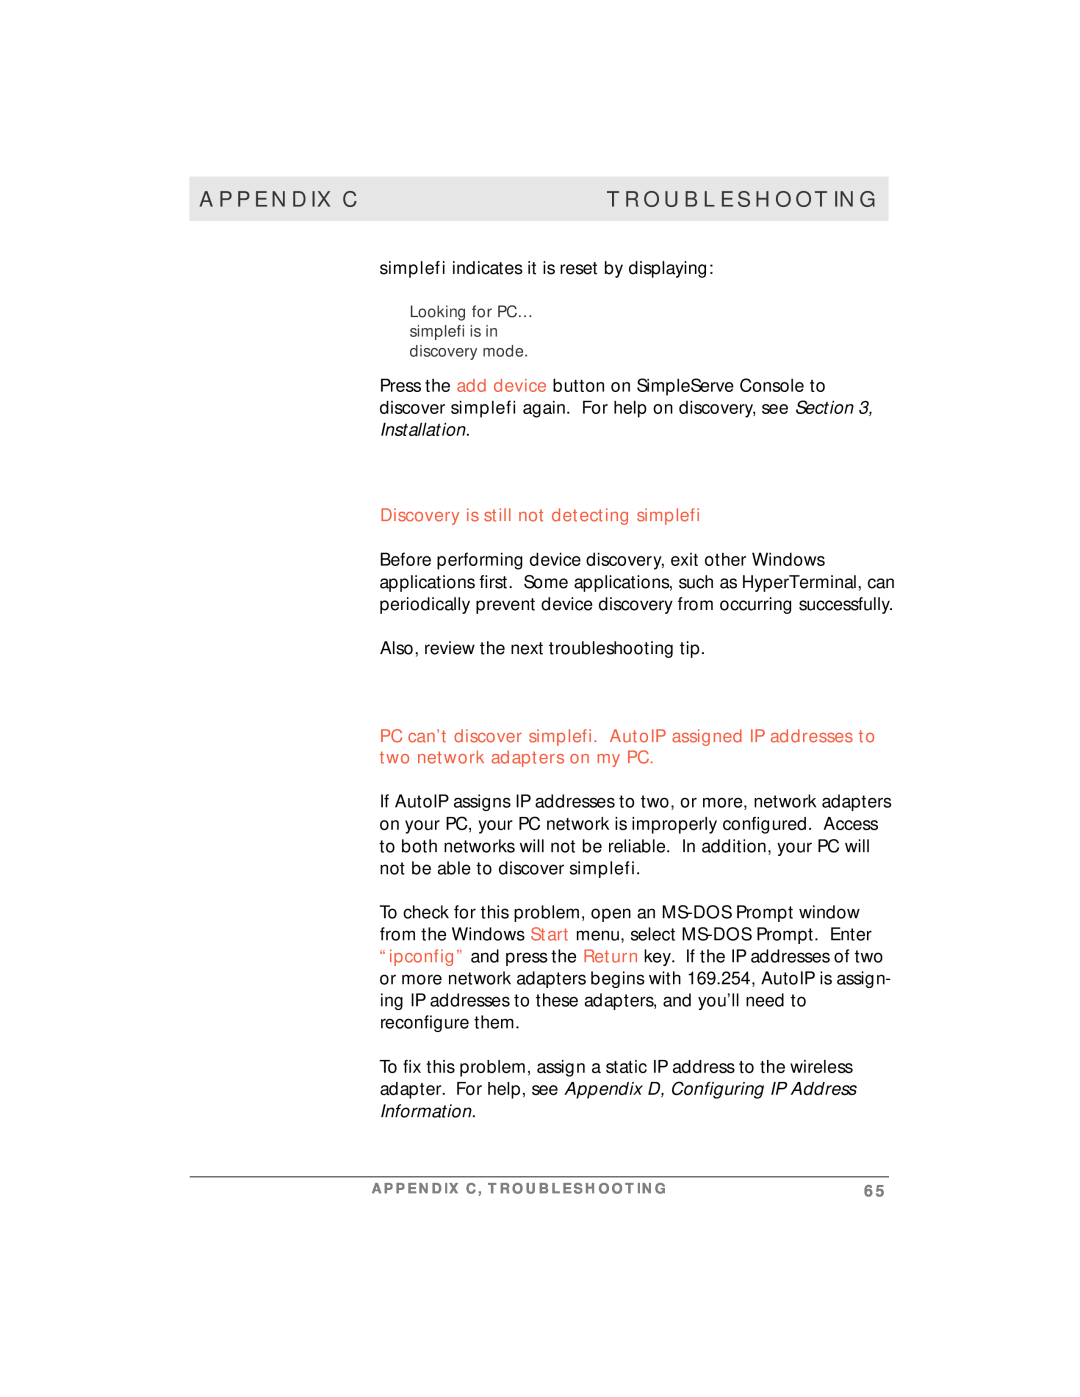 Motorola manual Discovery is still not detecting simplefi, Appendix C, Troubleshooting 